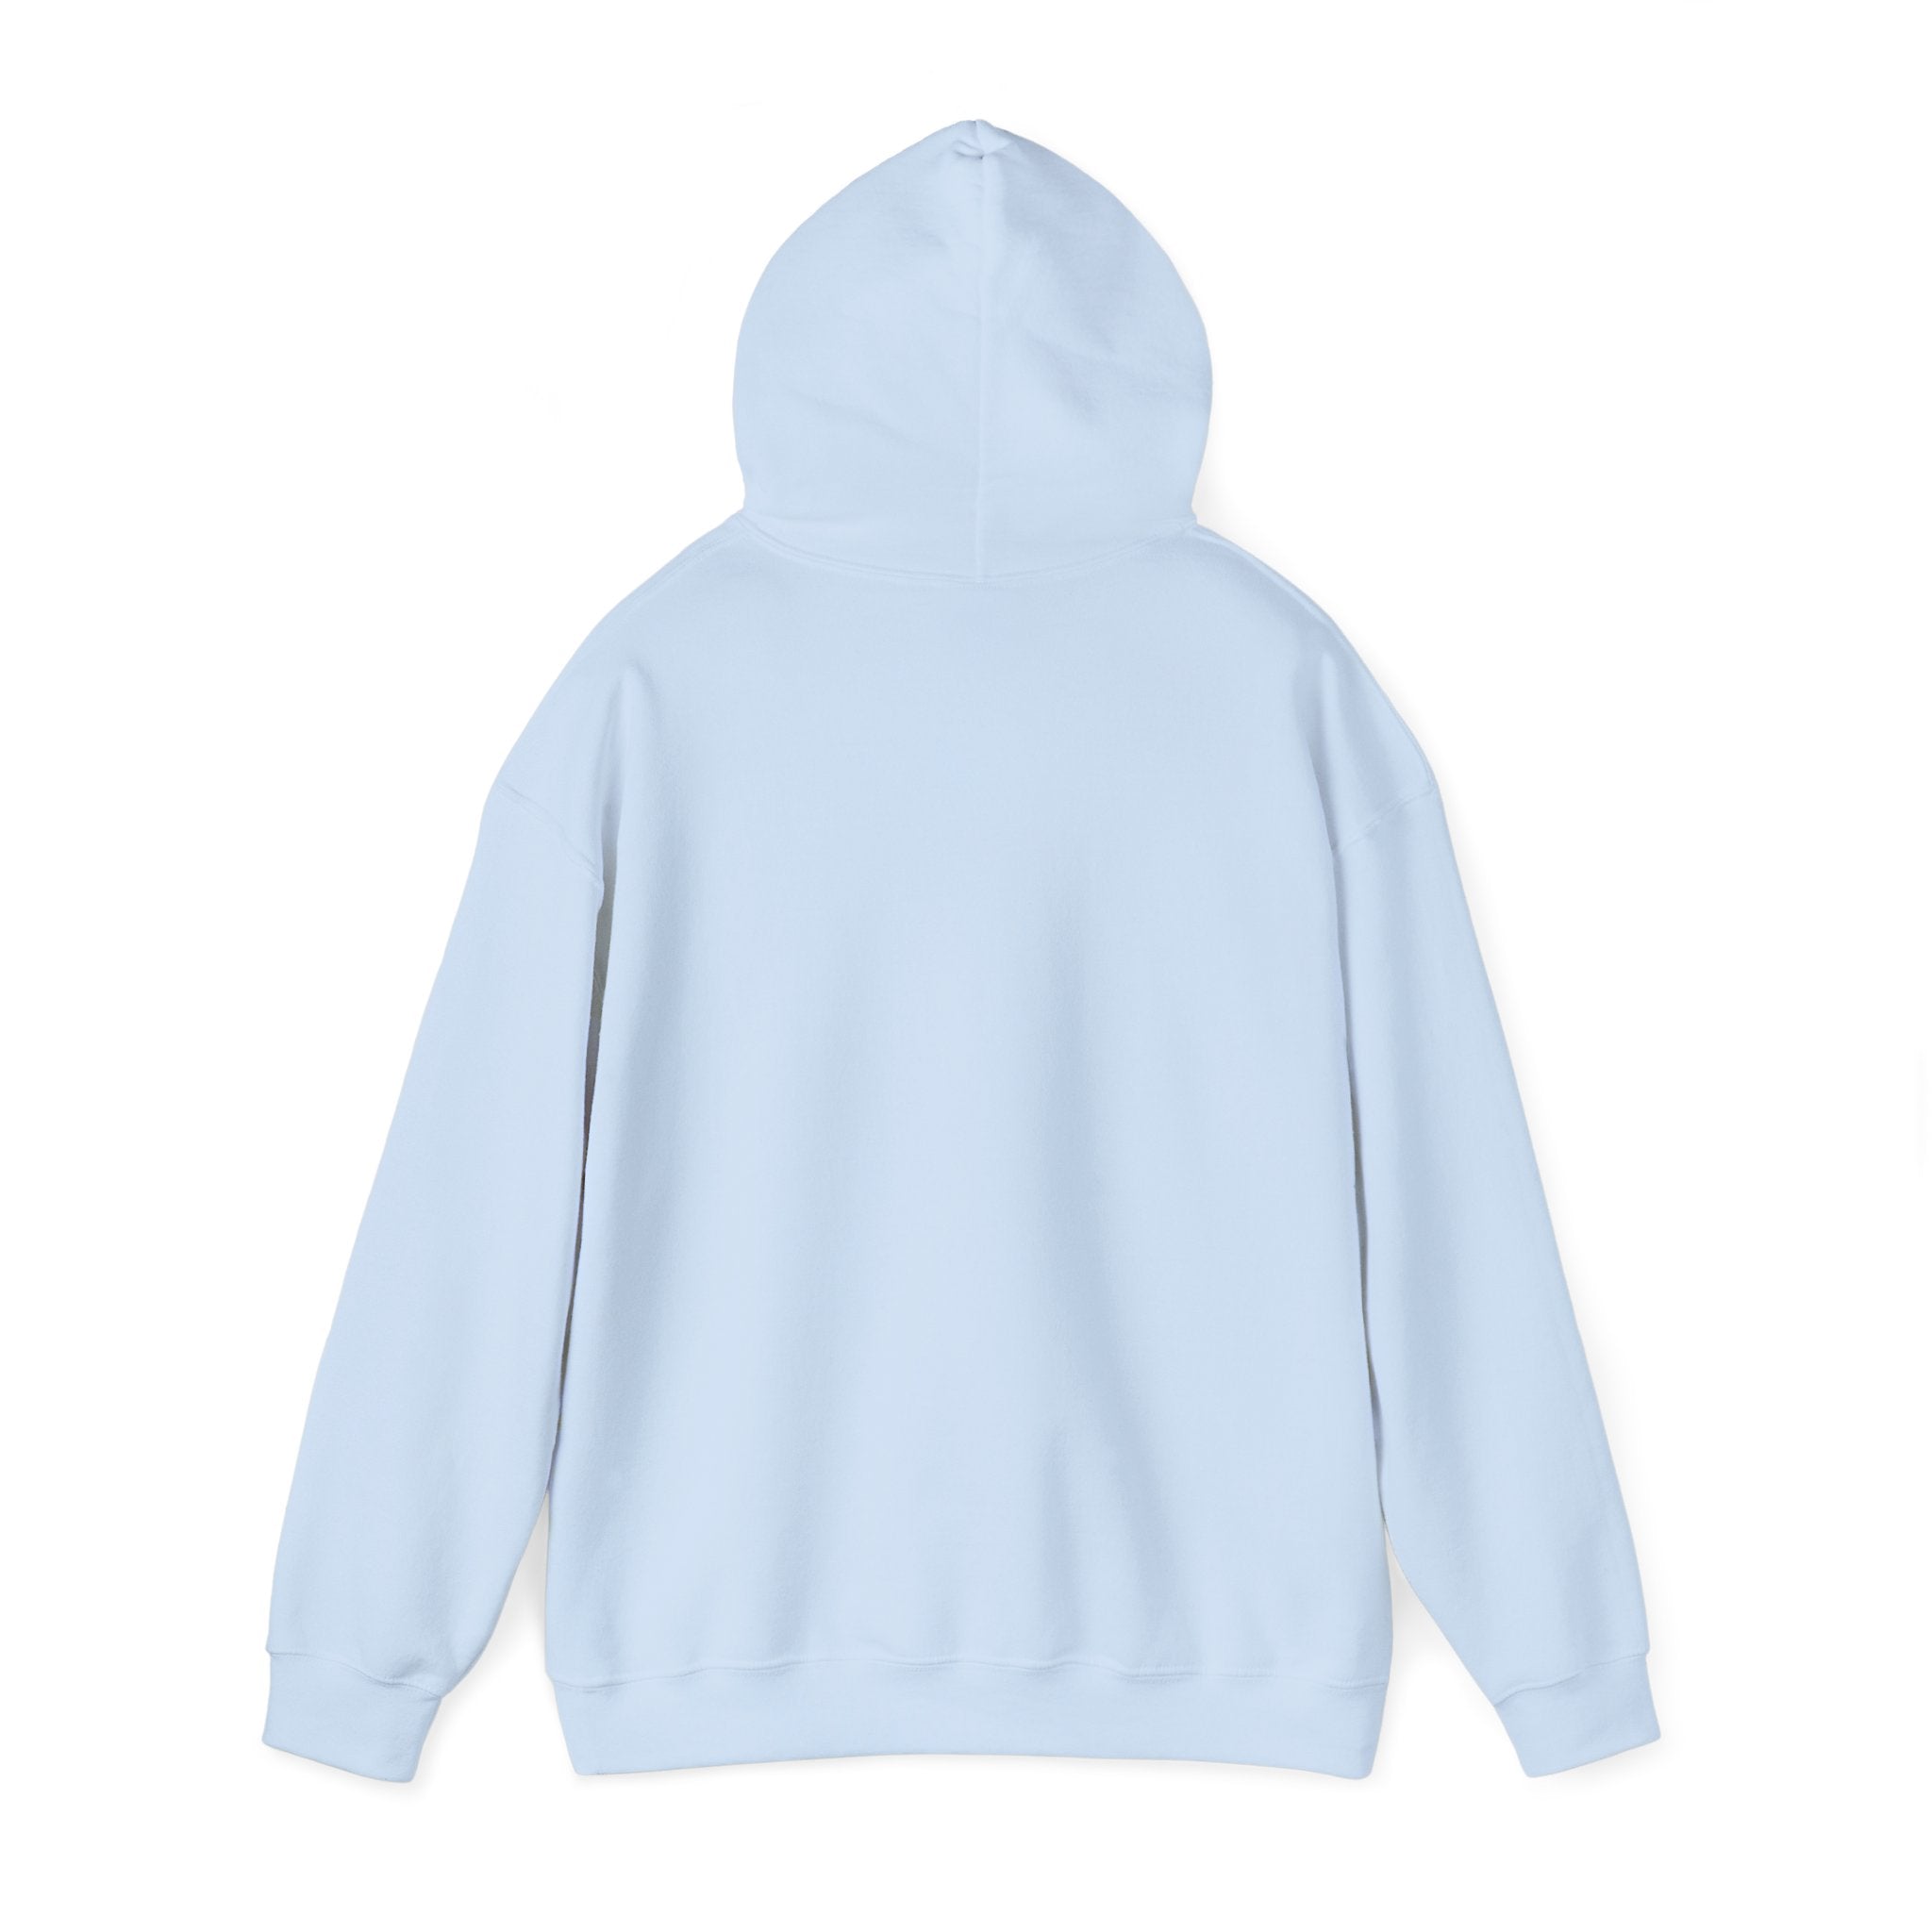 A light blue hooded sweatshirt, shown from the back, featuring a simple, plain design with no visible logos or embellishments. This classic fit My Otter Shirt - Hooded Sweatshirt is perfect for those who appreciate understated style.